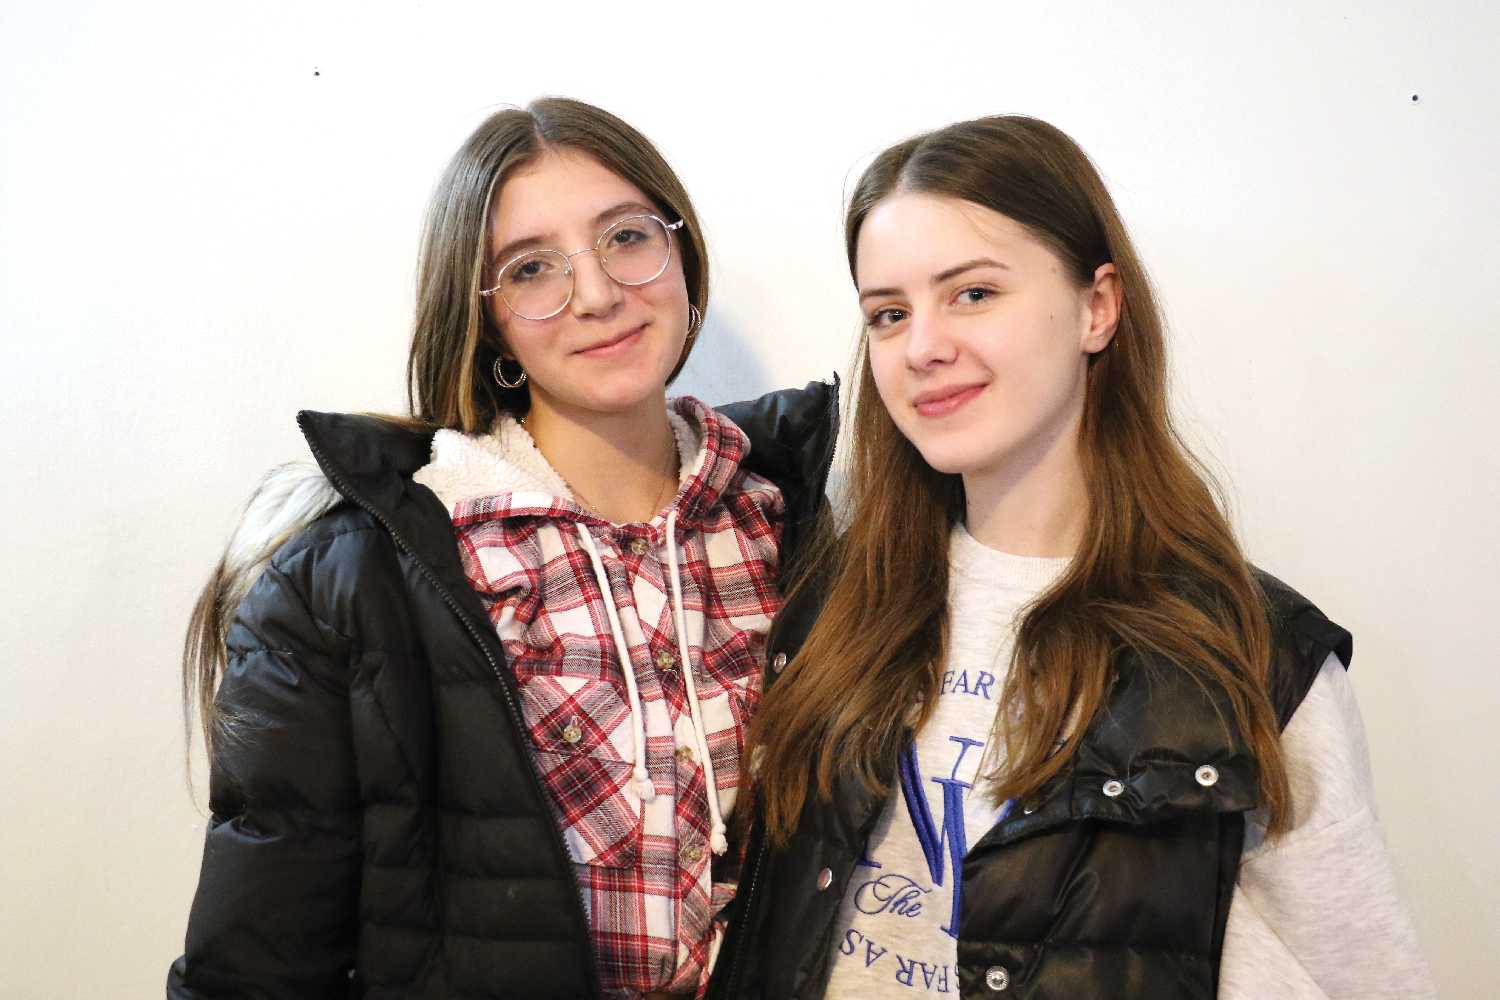 Viktoriia Buzdyhan, left, and Viktoriia Knyhnystska, right, came with their families from Ukraine and have settled in Wawota. They would like to go to university in Saskatchewan, but because newcomers from Ukraine are not classed as refugee claimants or permanent residents, they are subject to the same fees as international students (multiple times higher than the tuition fees Canadian students pay) and do not qualify for student loans. The World-Spectator spoke with the Minister of Advanced Education Thursday and he said he will have his ministry look at how they can fix the situation.